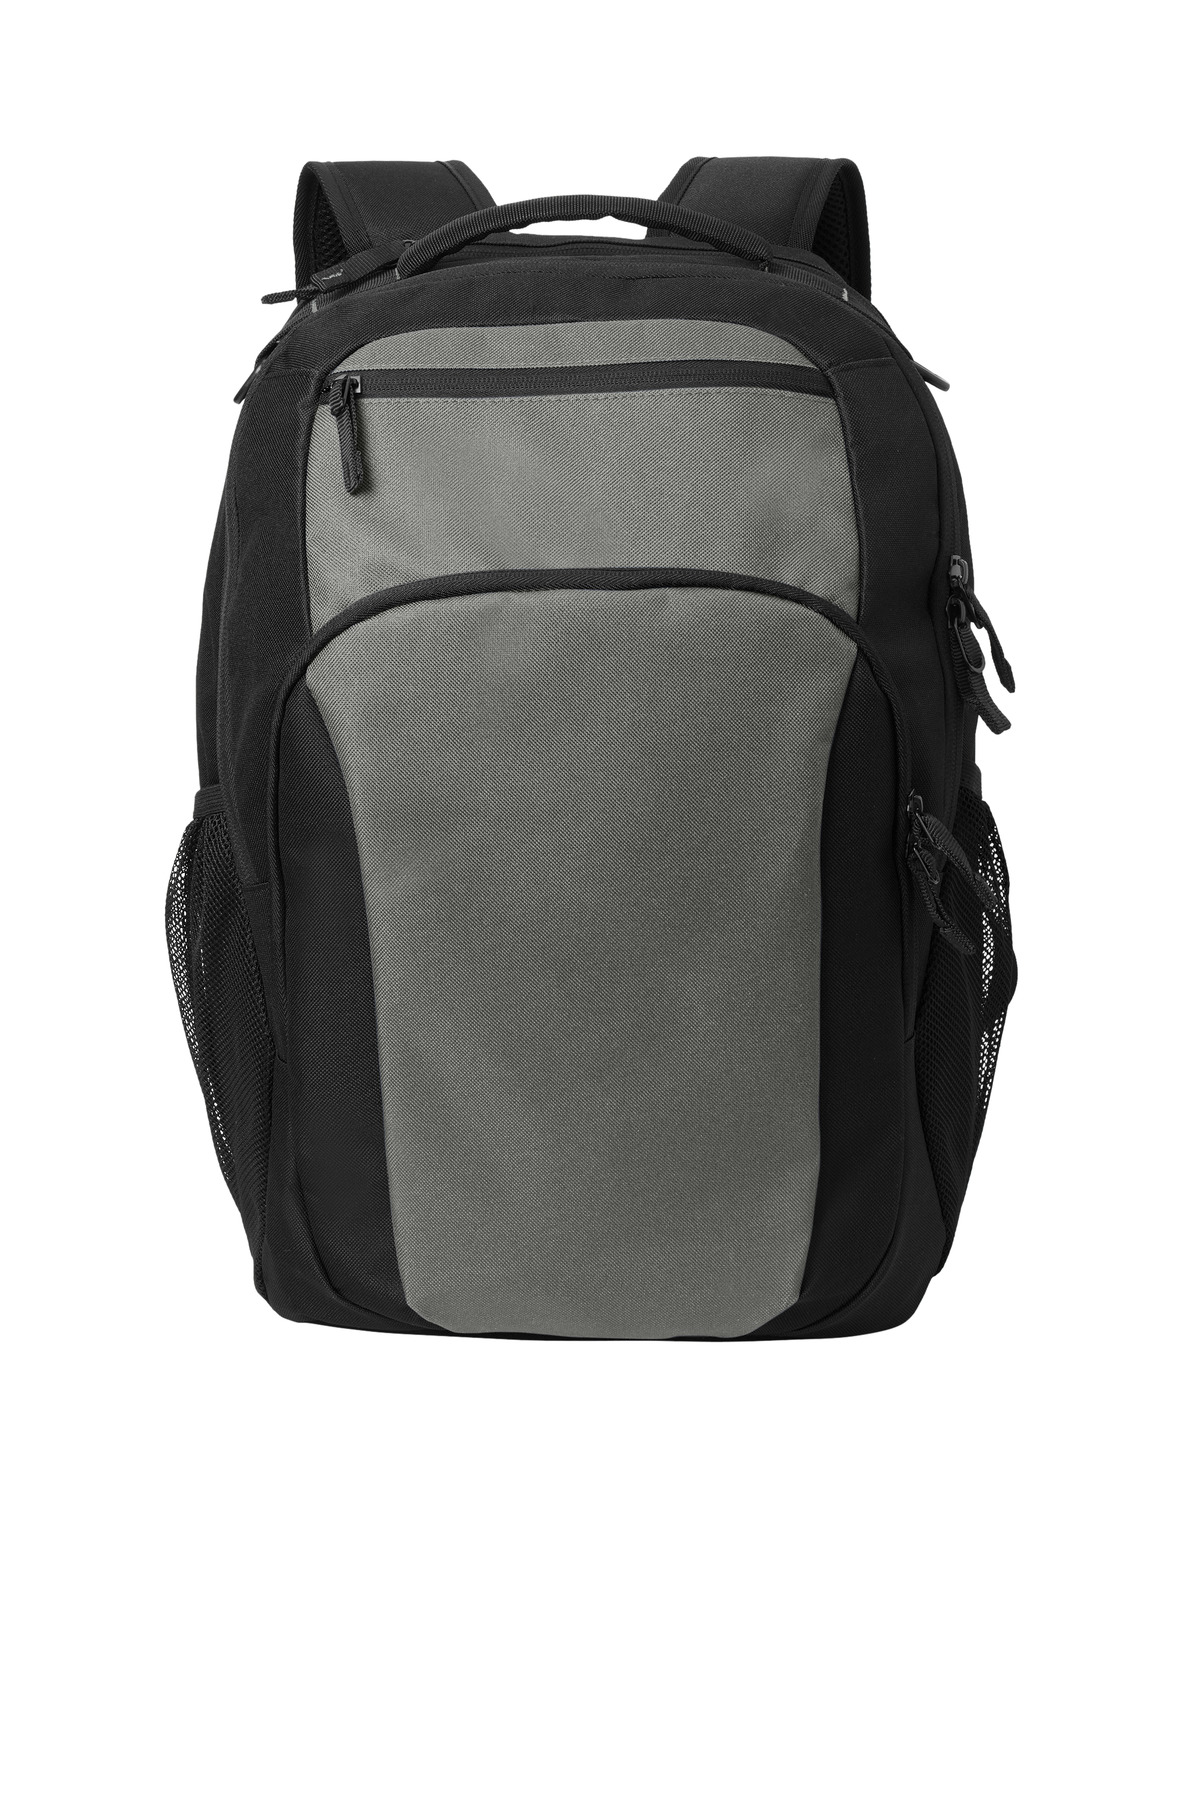 Port Authority Transport Backpack-Port Authority